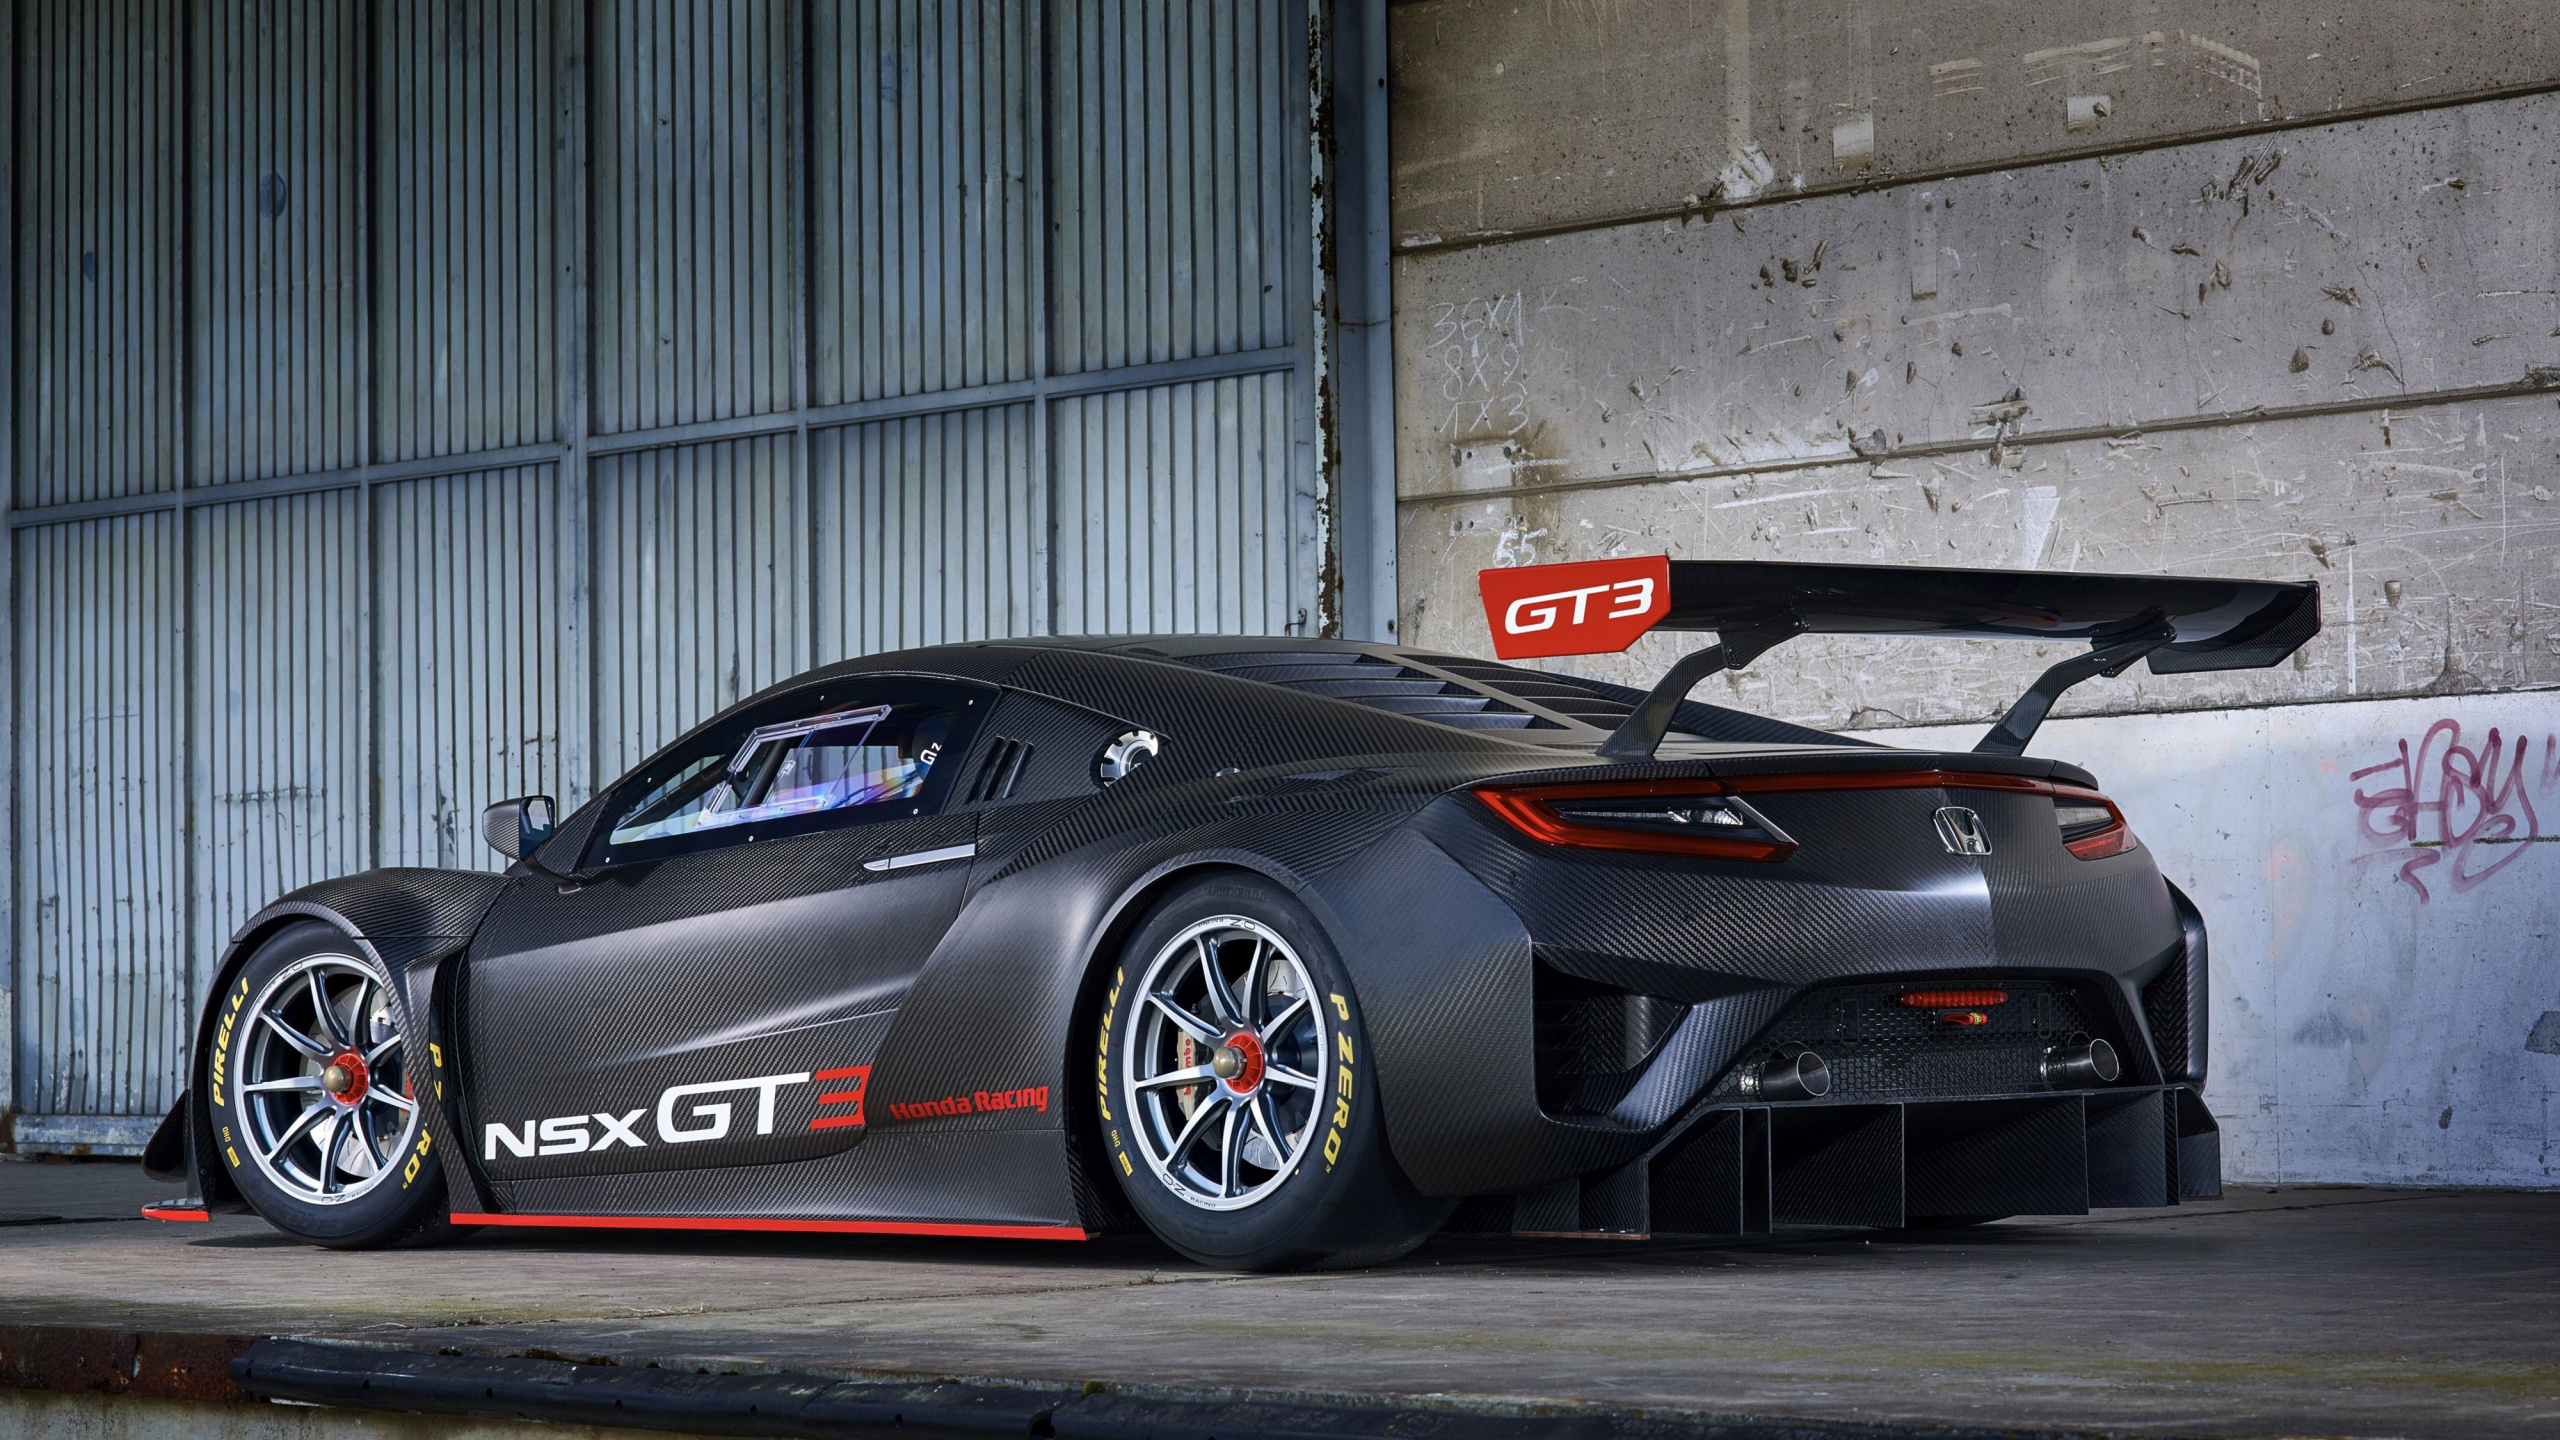 Download 2560x1440 Wallpaper Honda, Acura Nsx Gt Side View